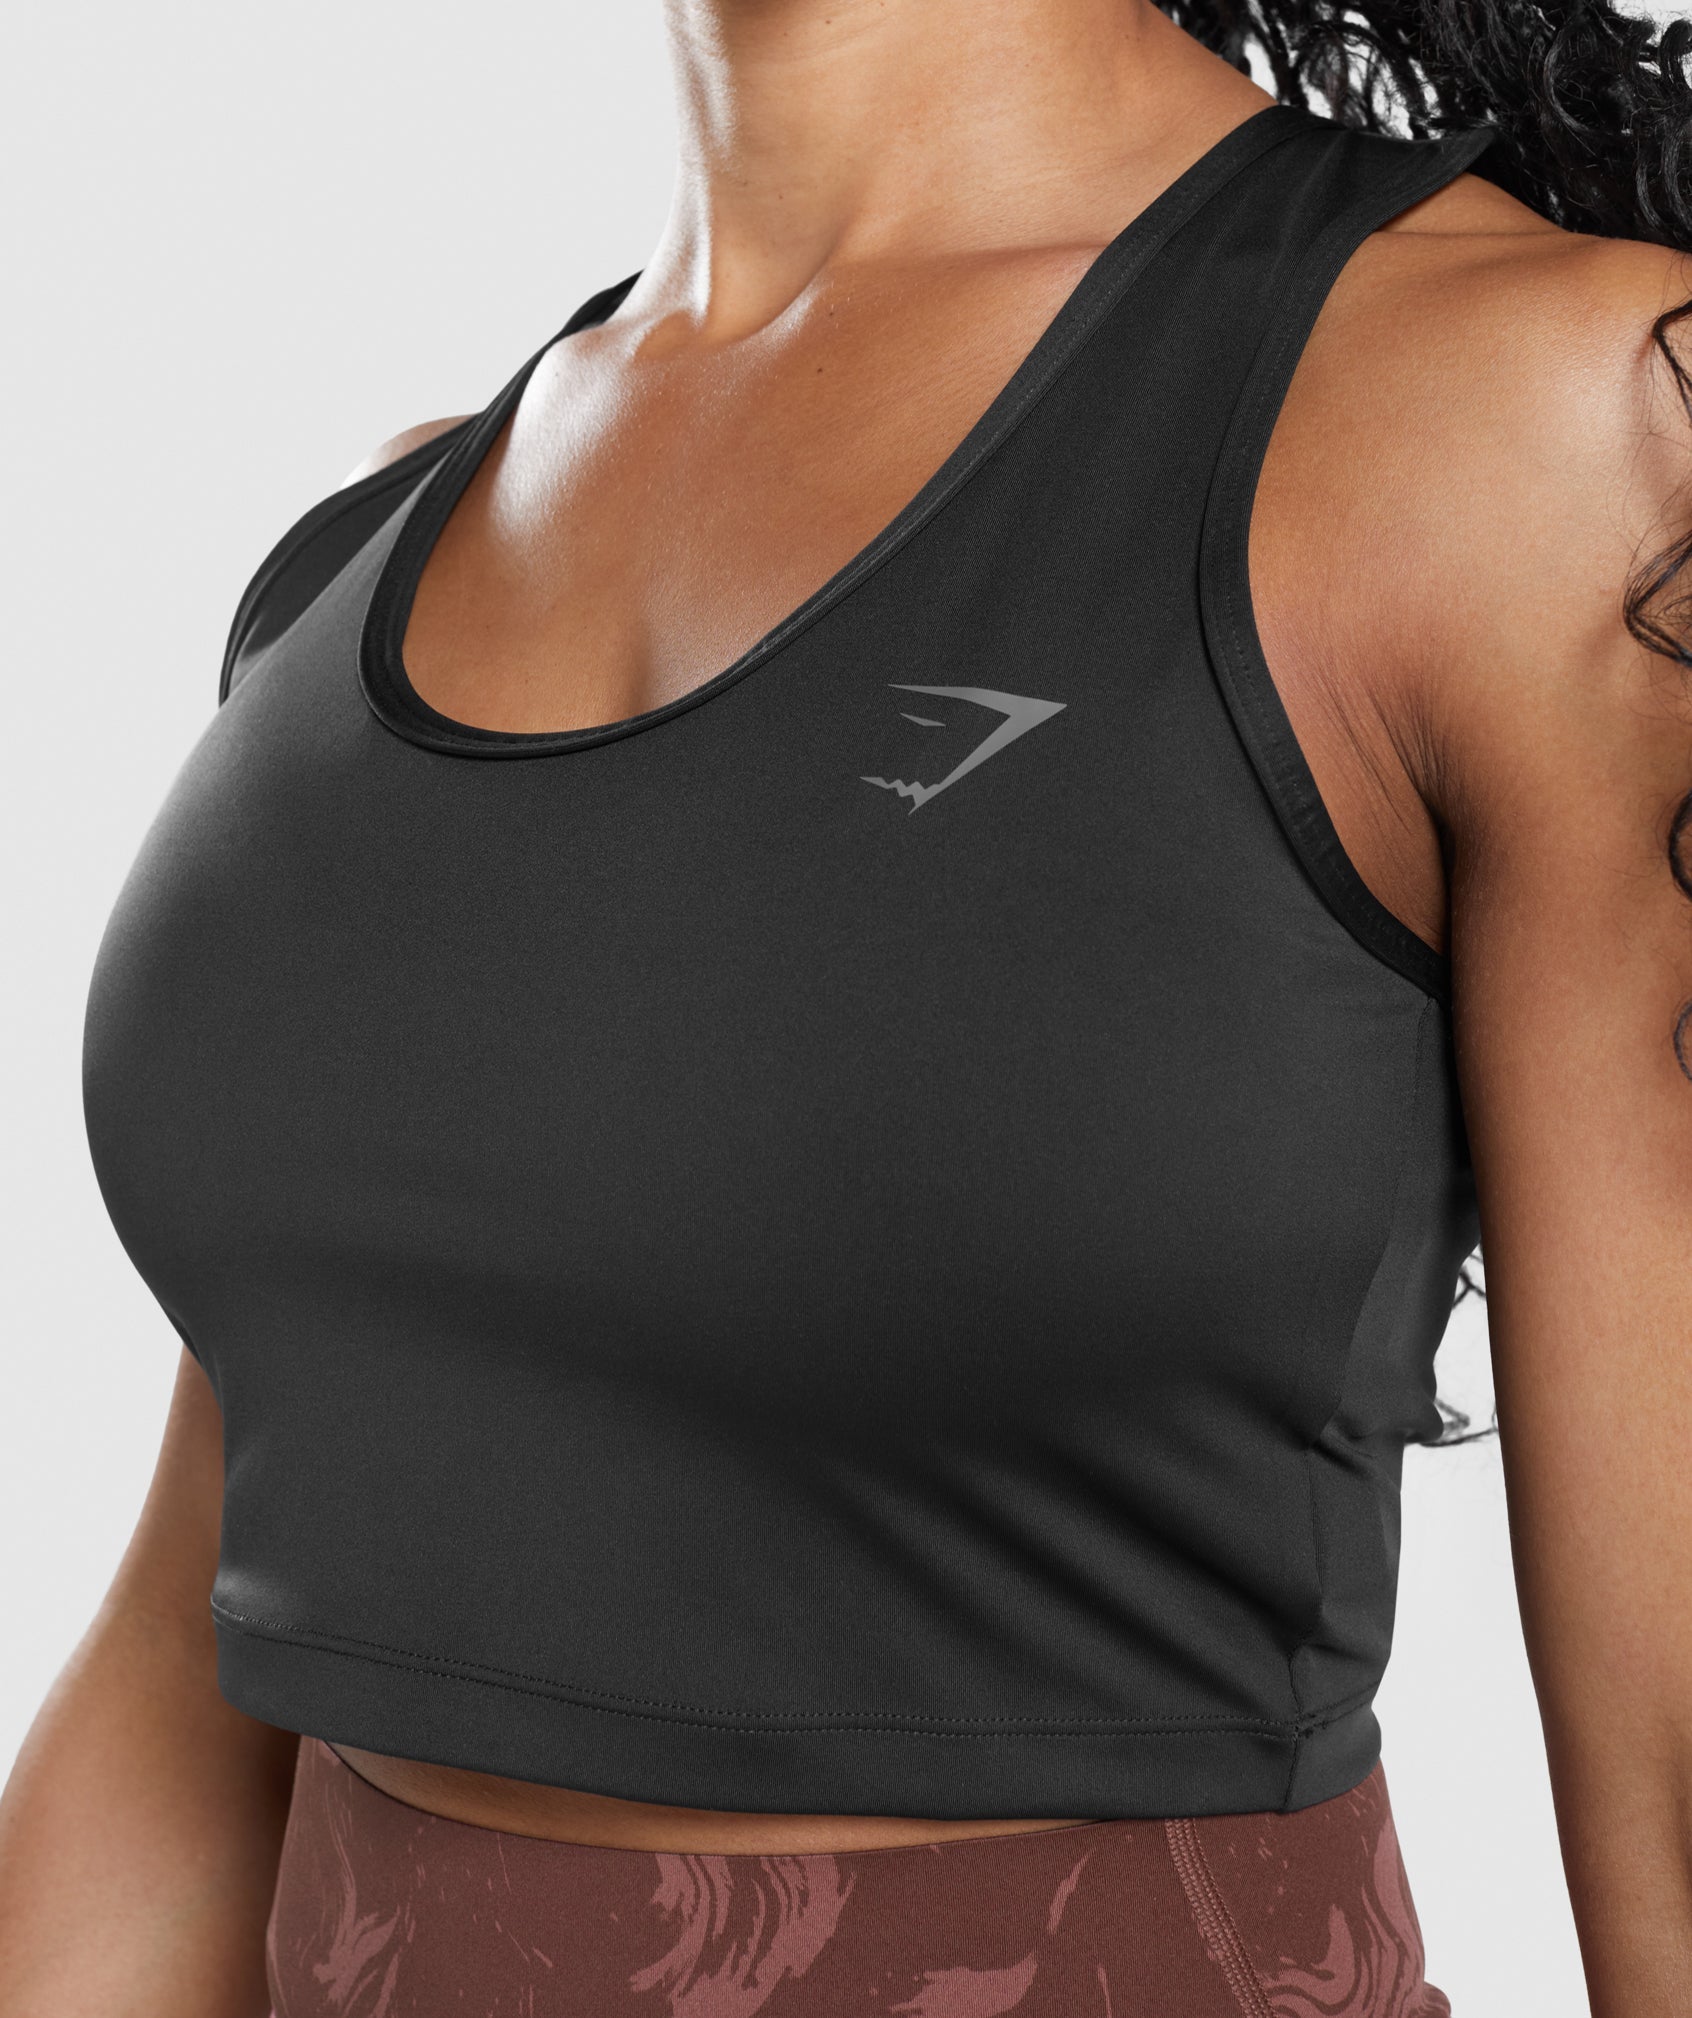 Gymshark on X: Essential gym wear. The Crop Mesh Back tank is the perfect  combination of fashion and function. With up to 50% off site wide, you  can't miss out. #GymsharkBlackout